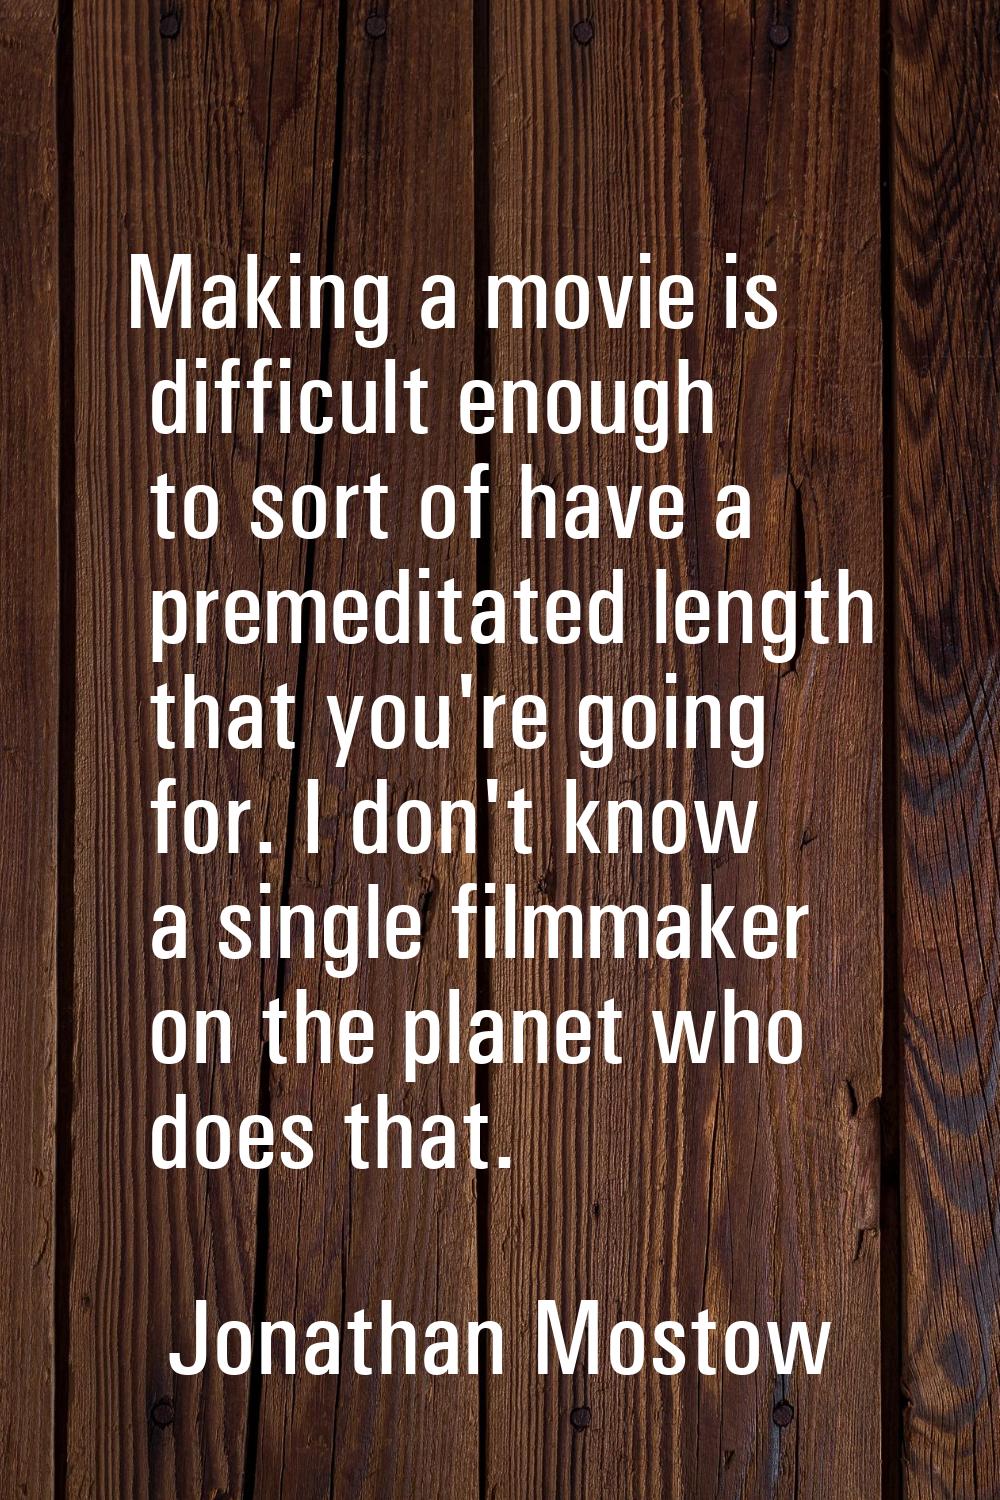 Making a movie is difficult enough to sort of have a premeditated length that you're going for. I d